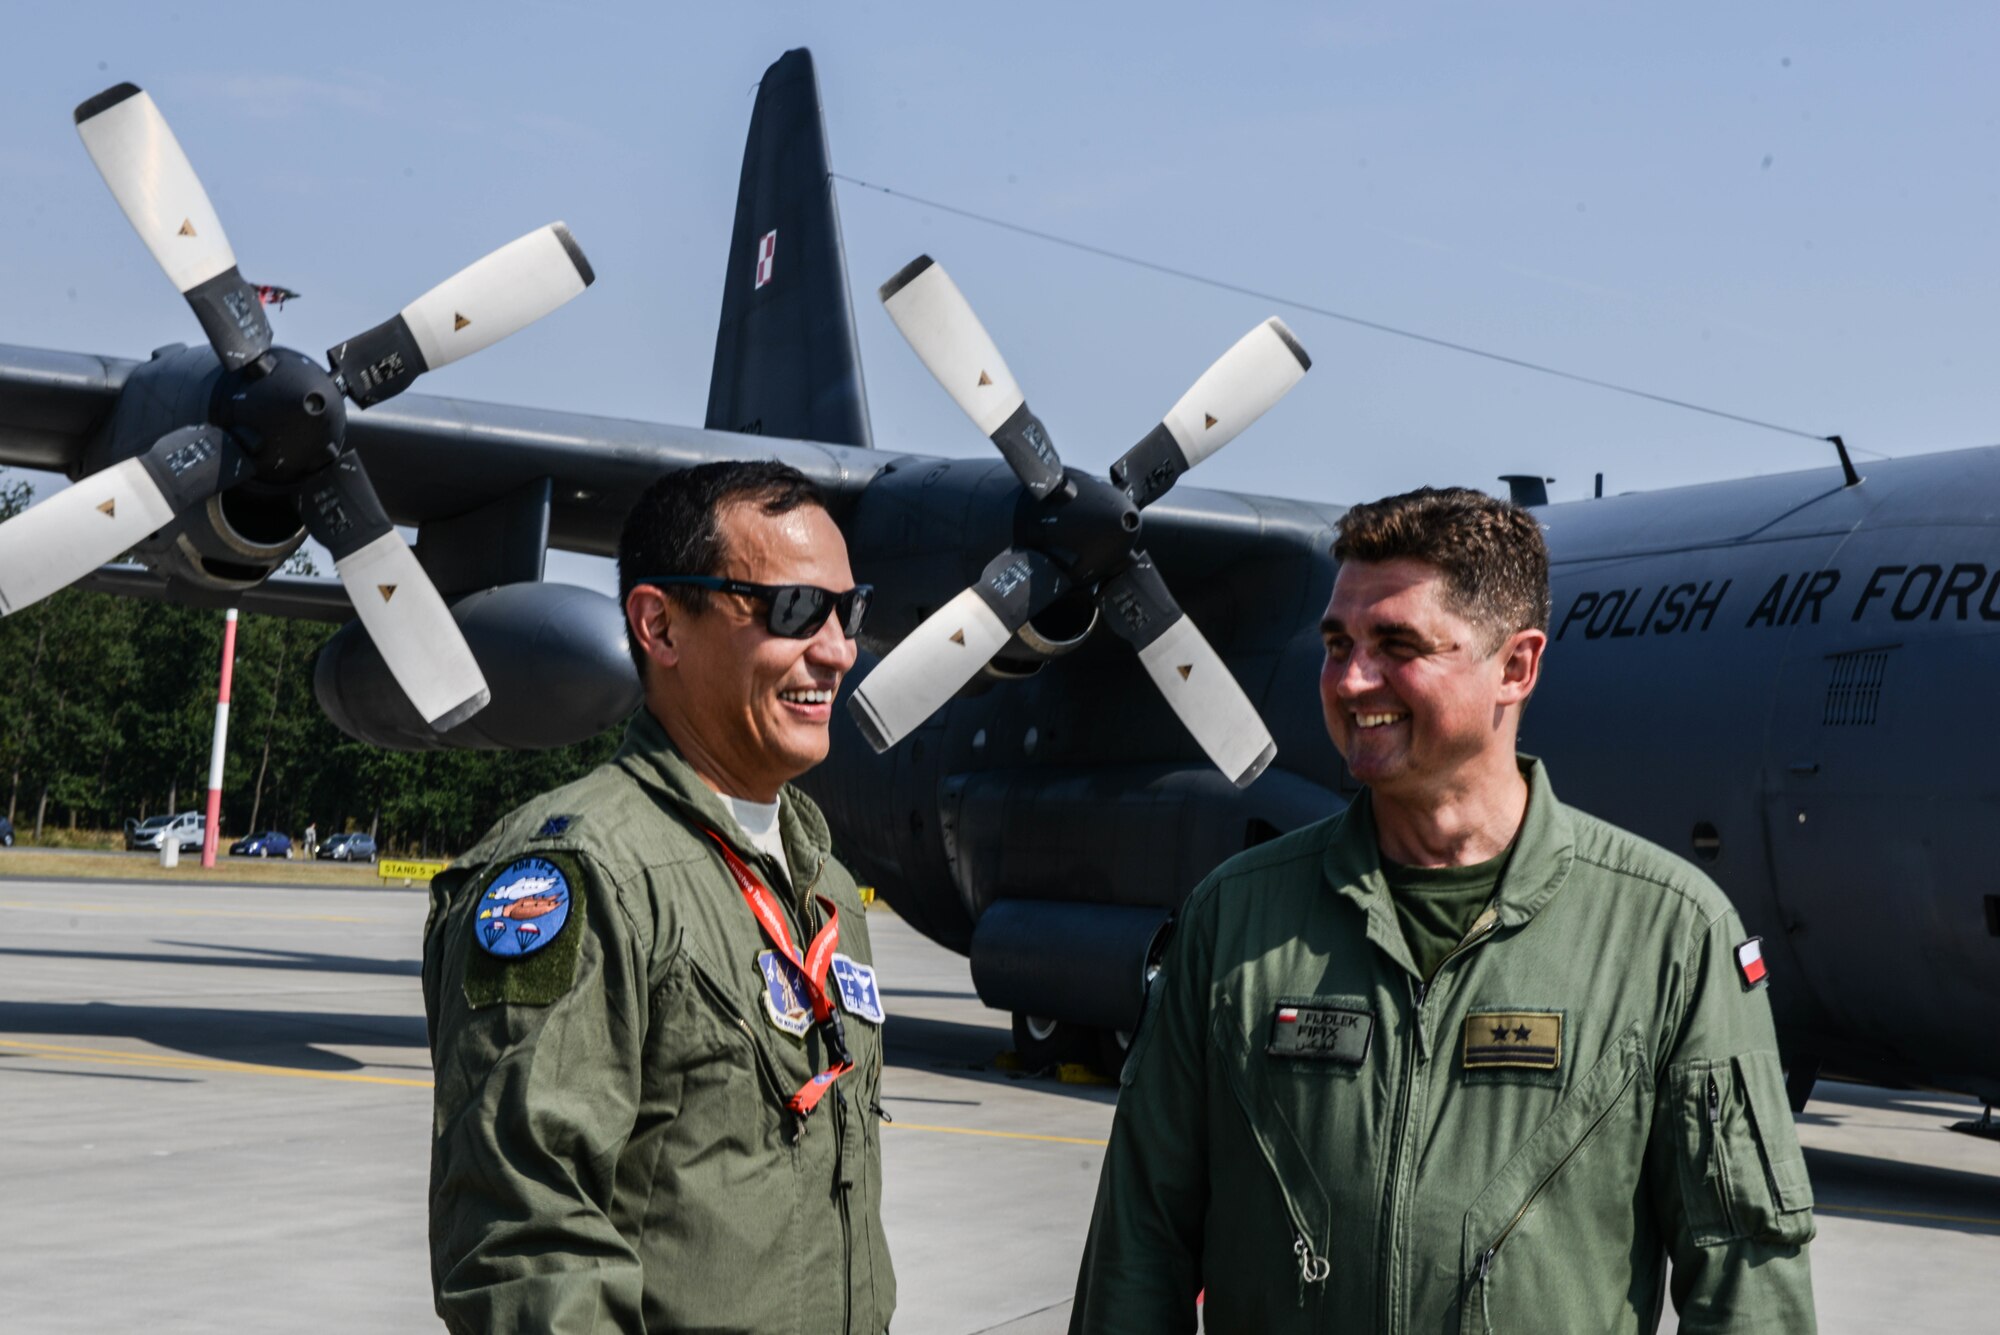 U.S. Air Force Lt. Col. Peter LaBarbera, 52nd Operations Group Detachment 1 assistant director of operations, enjoys a conversation with a Polish Air Force officer on Powidz Air Base, Poland, Aug. 9, 2018. The 52nd OG is based out of Spangdahlem Air Base, Poland, but maintains a permanent presence in Poland through Detachment 1. (U.S. Air Force photo by Senior Airman Joshua Magbanua)